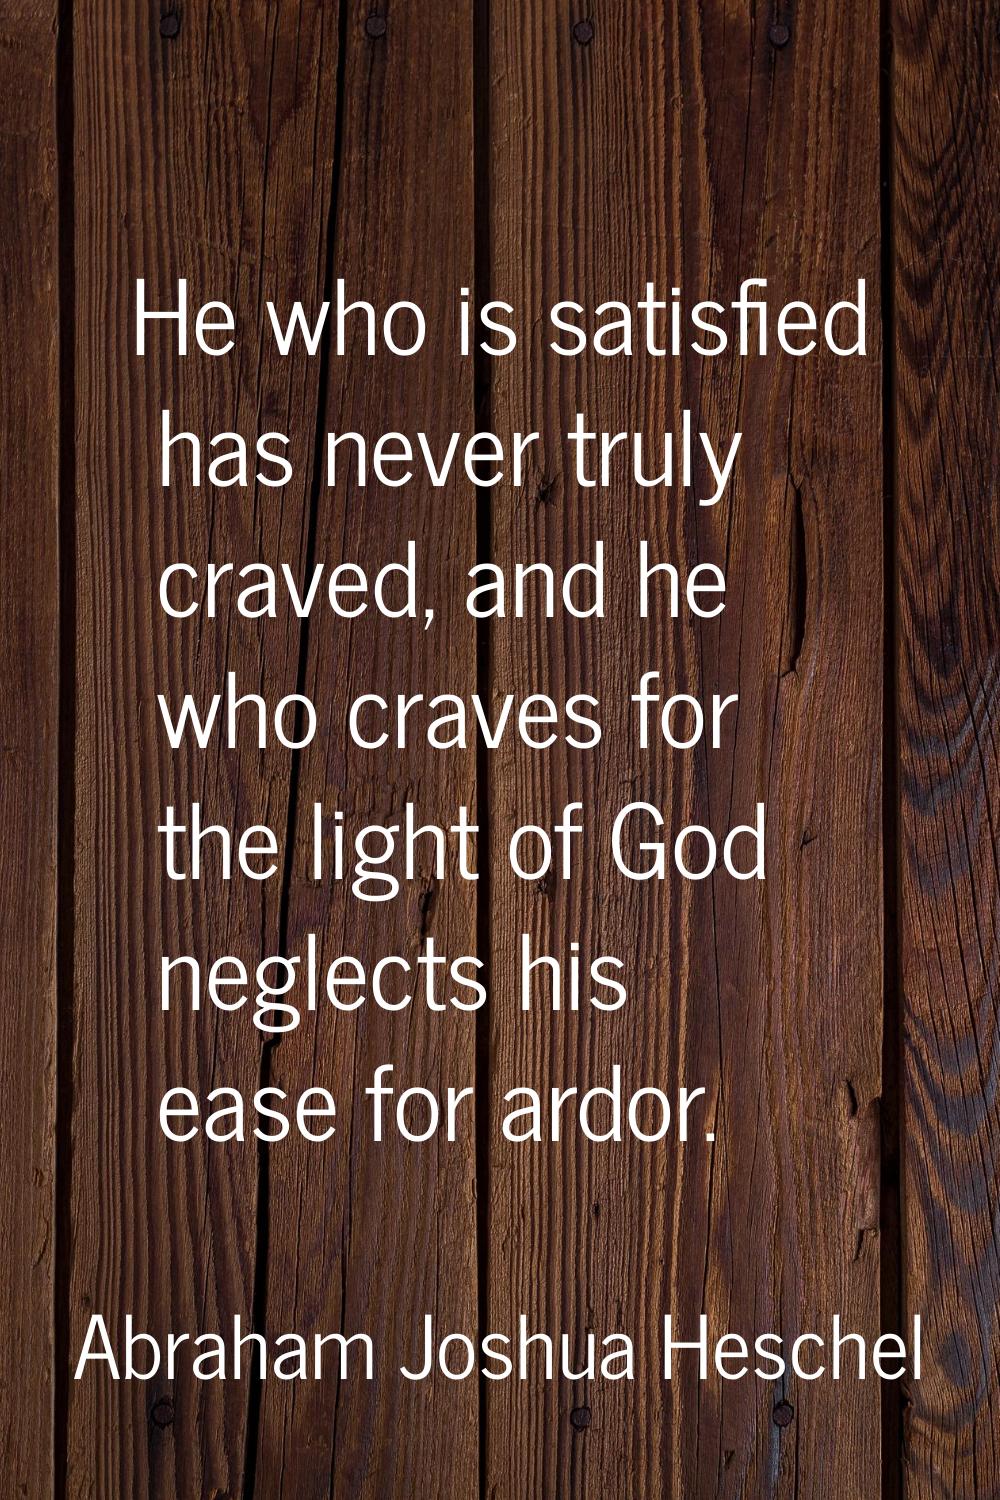 He who is satisfied has never truly craved, and he who craves for the light of God neglects his eas